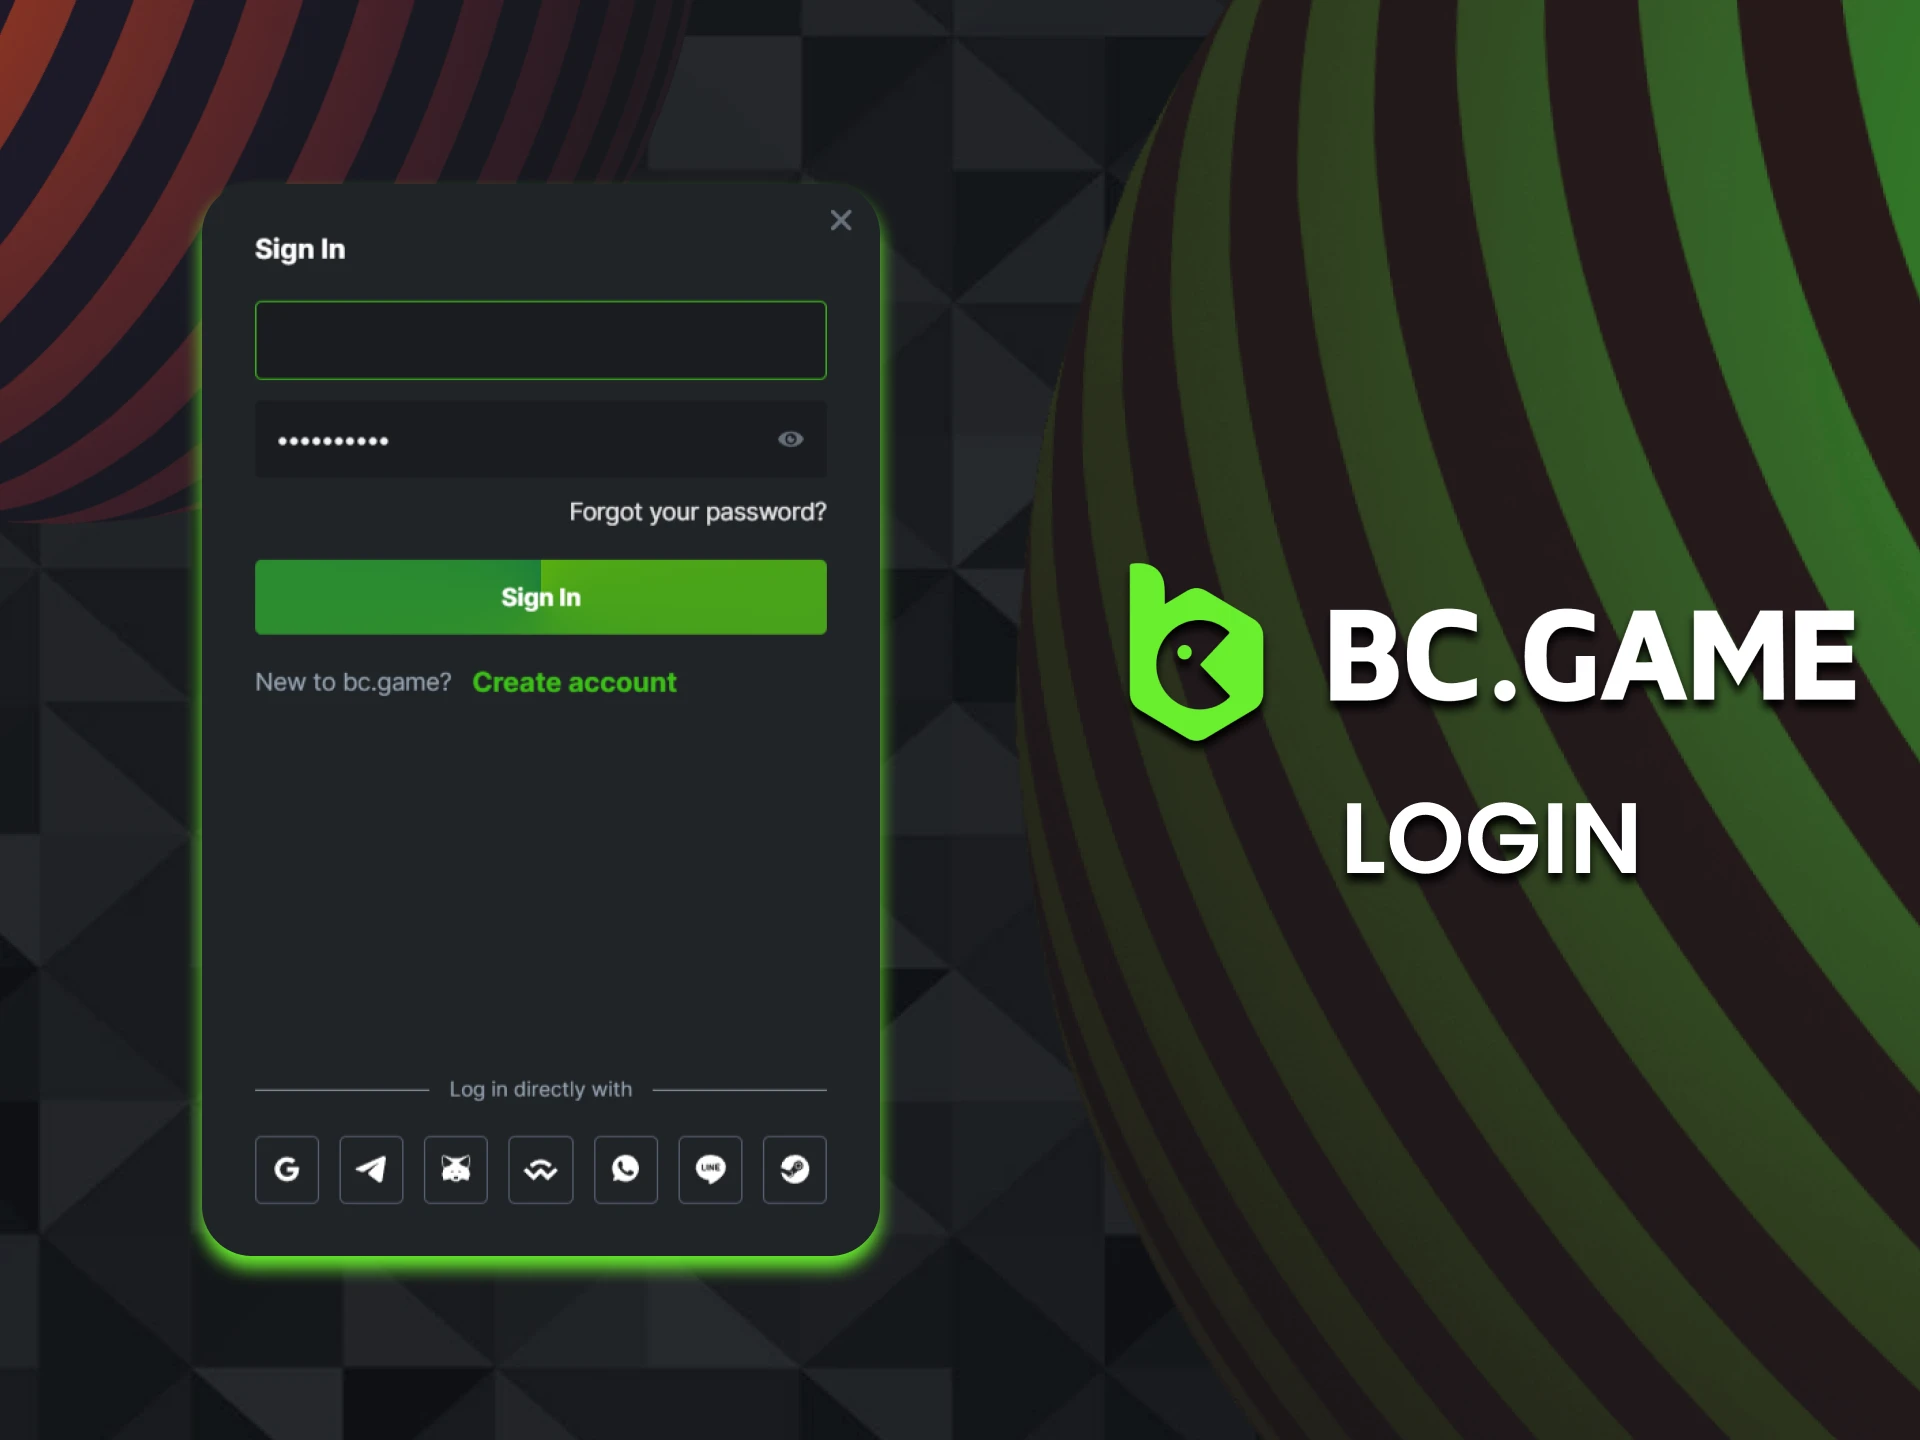 Log in to your BC Game account in 4 simple steps.